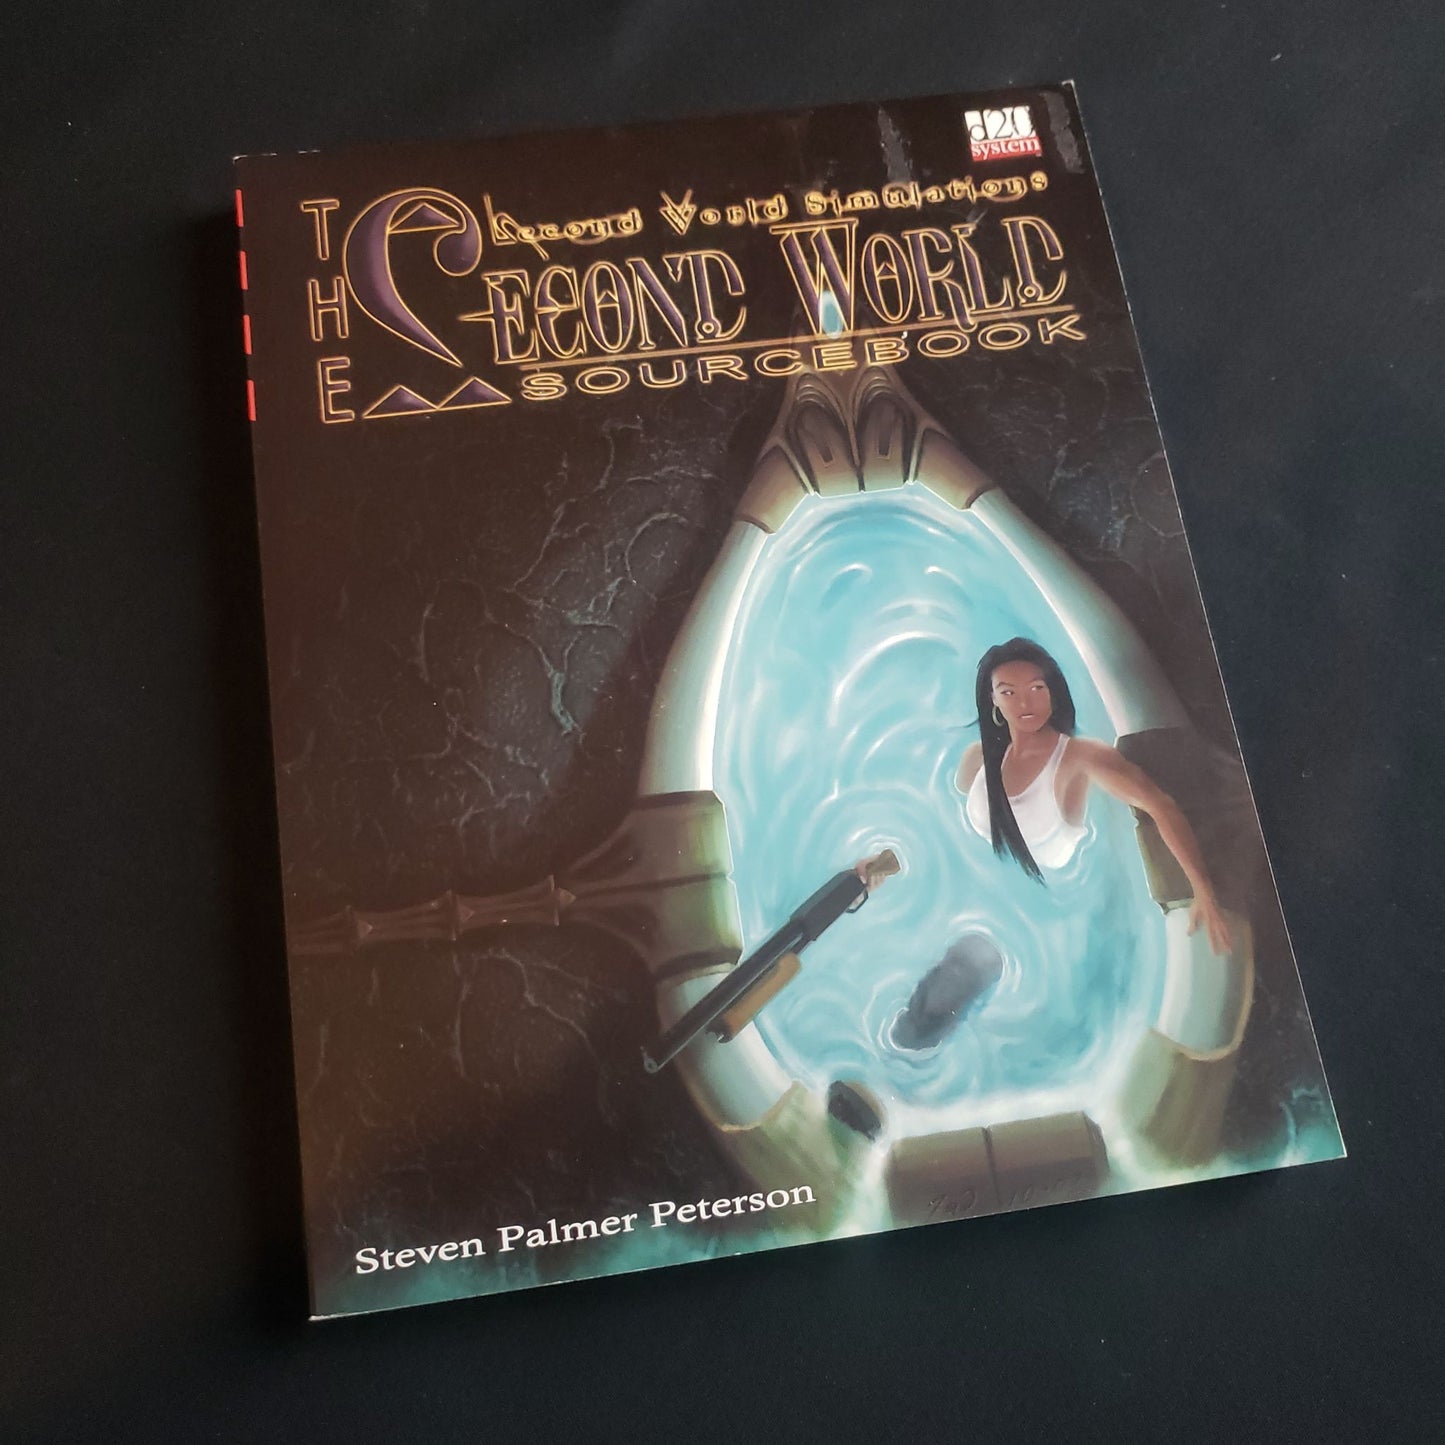 Second World Sourcebook roleplaying game - front cover of book